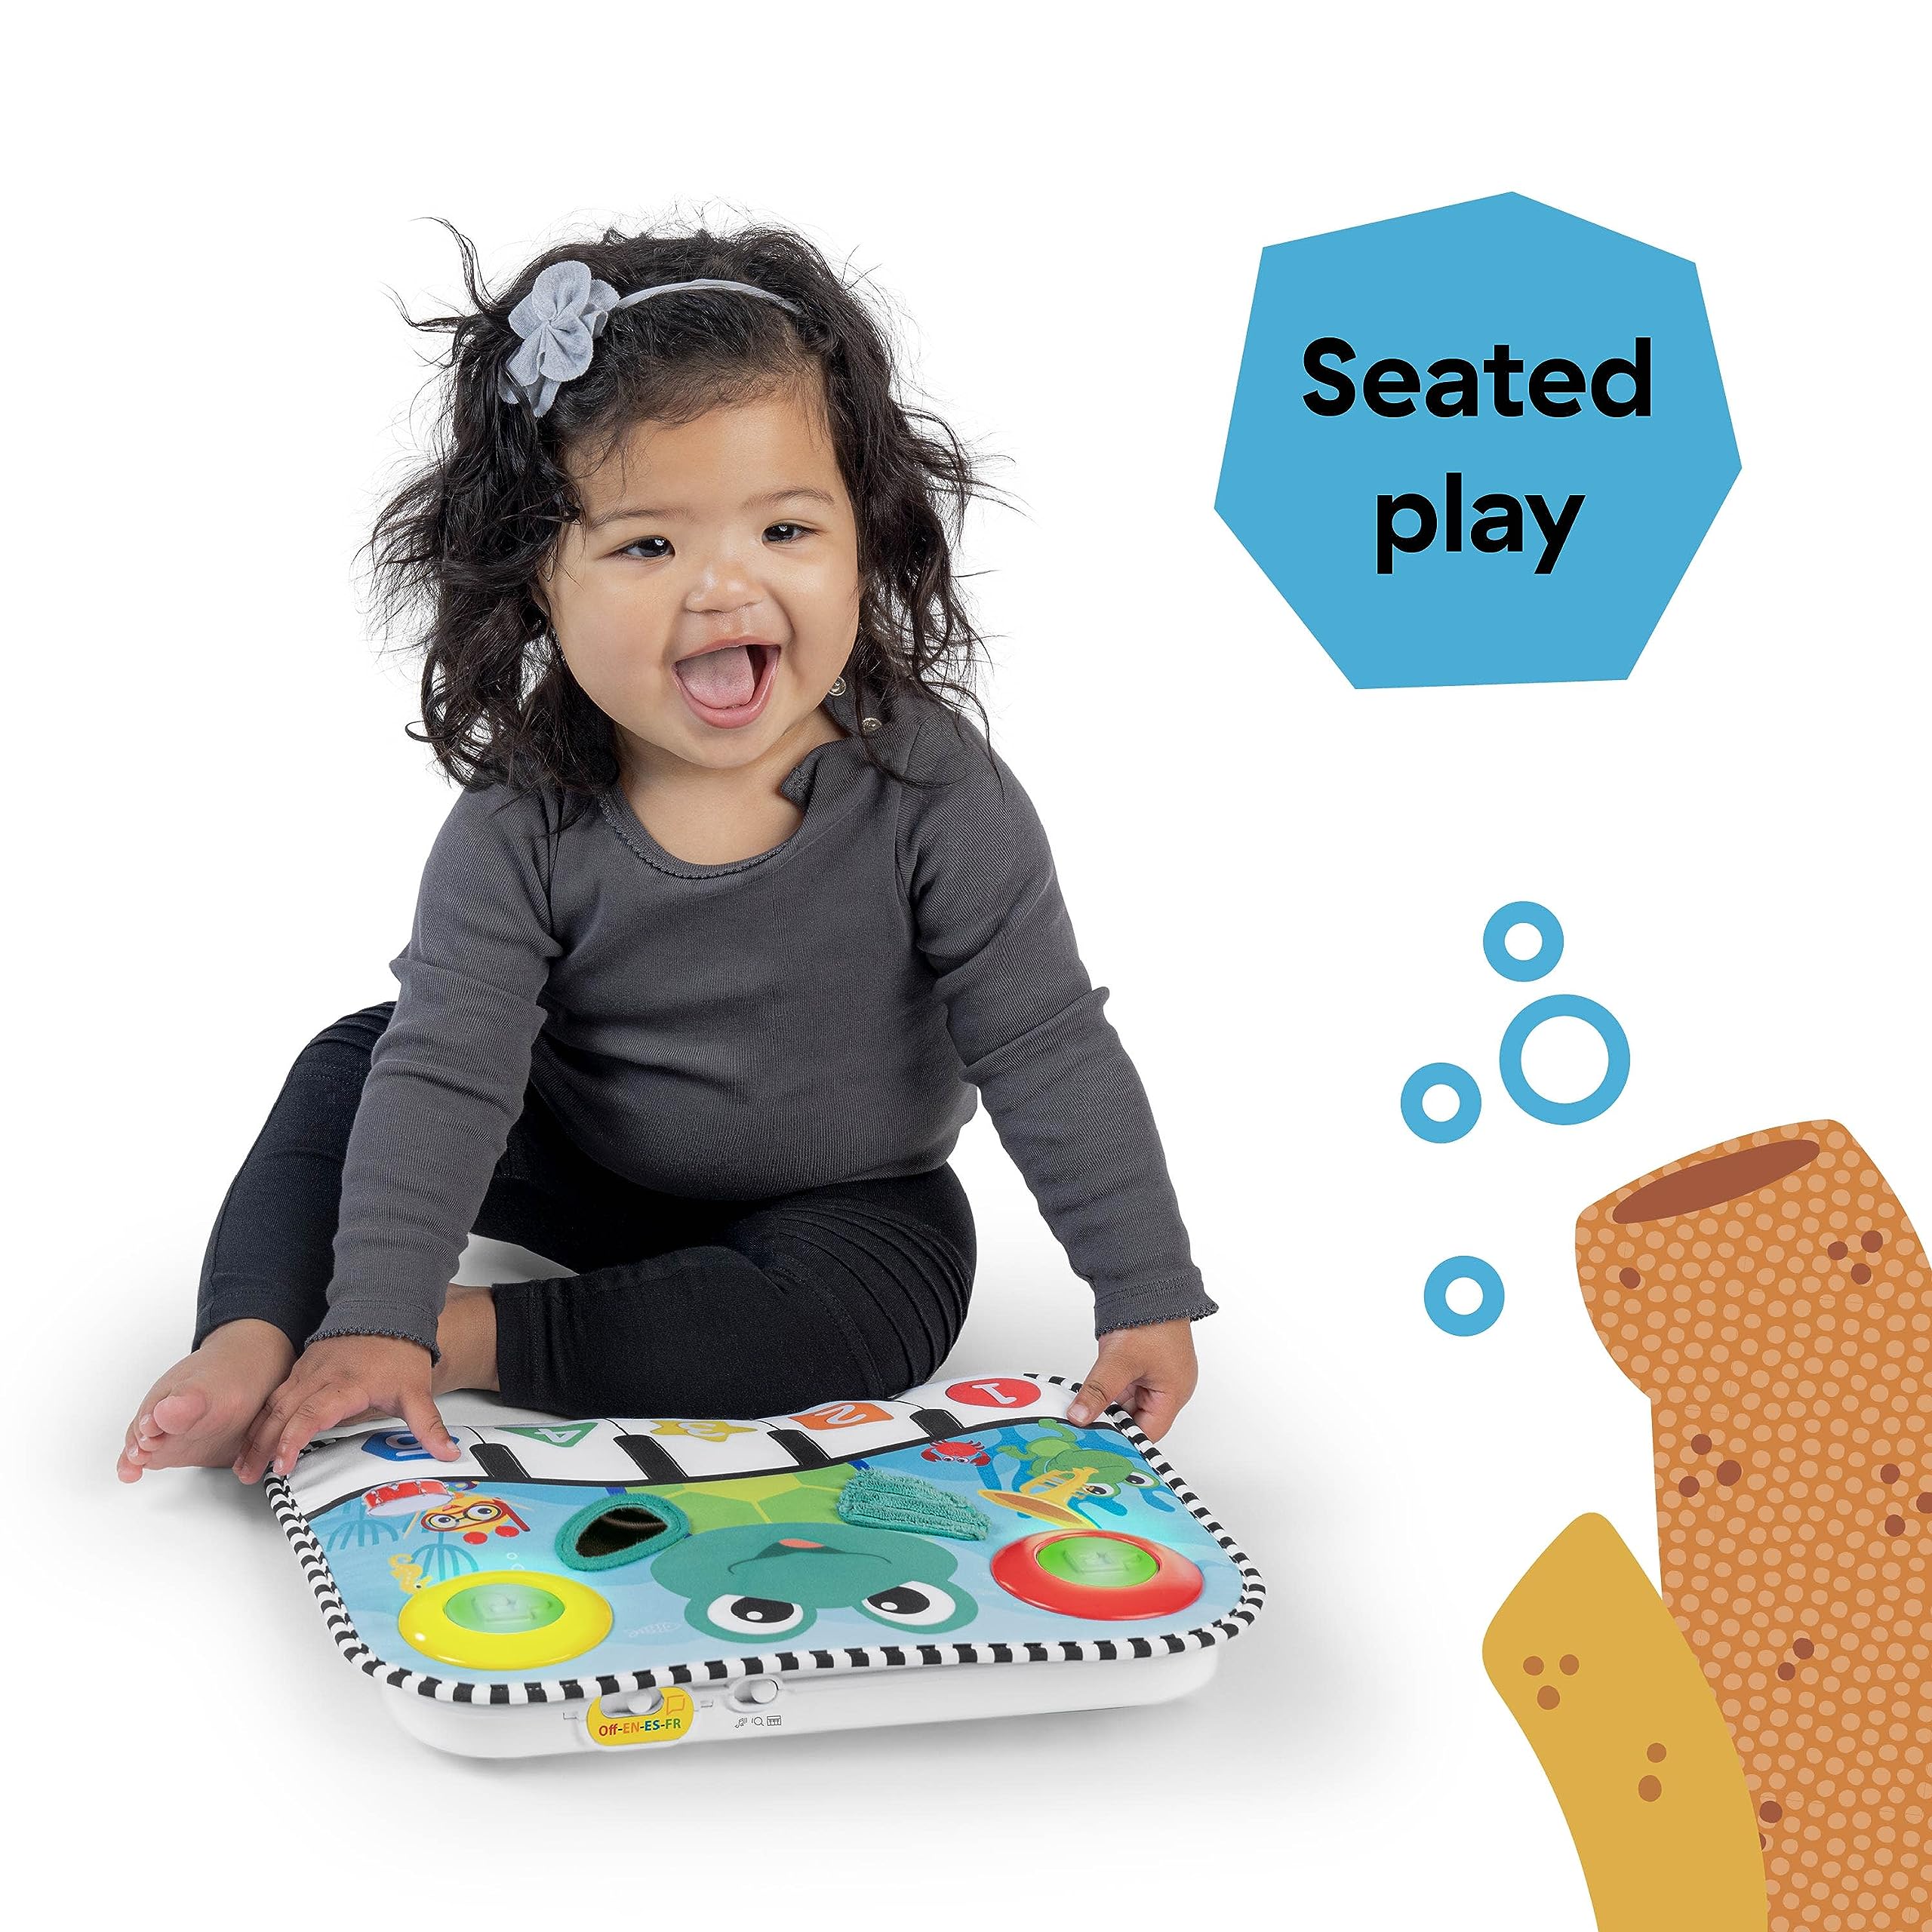 Baby Einstein Ocean Explorers Neptune's Kick & Explore Musical Kick Pad & Crib Toy, for Ages 0 Months and up